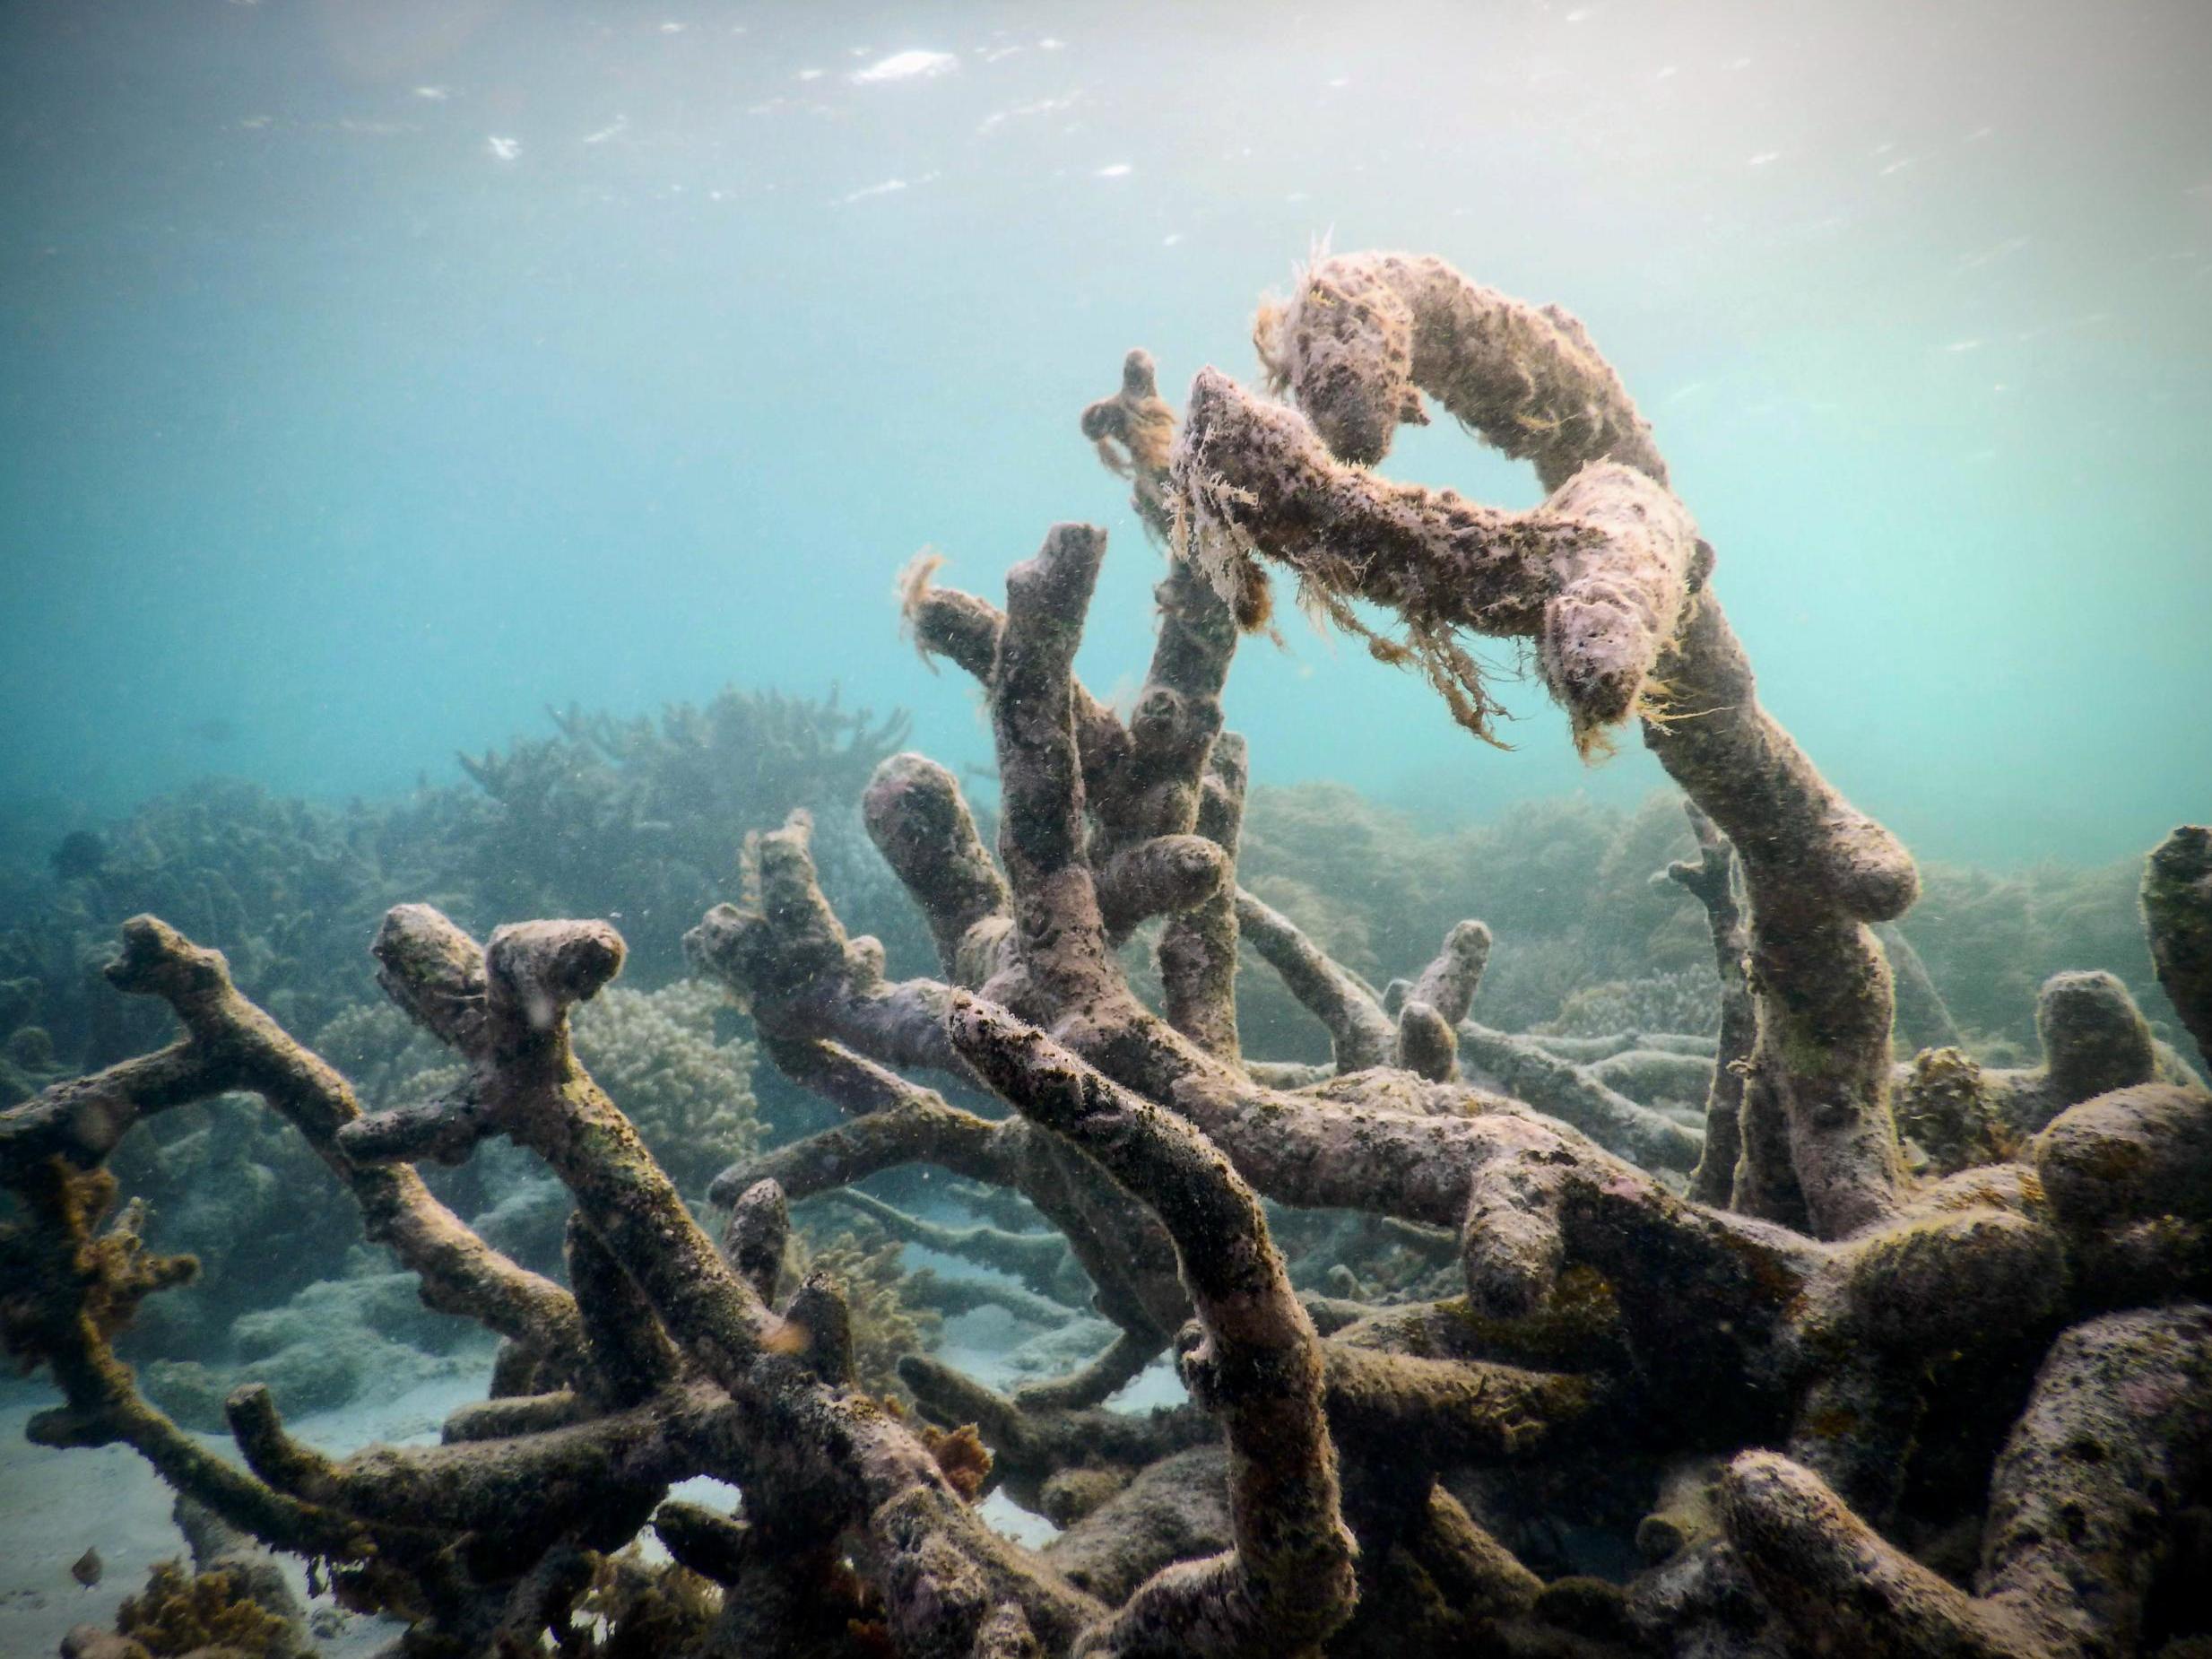 Pictured are dead coral skeletons on Australia's Great Barrier Reef. The letter encourages scientists to address ecological grief